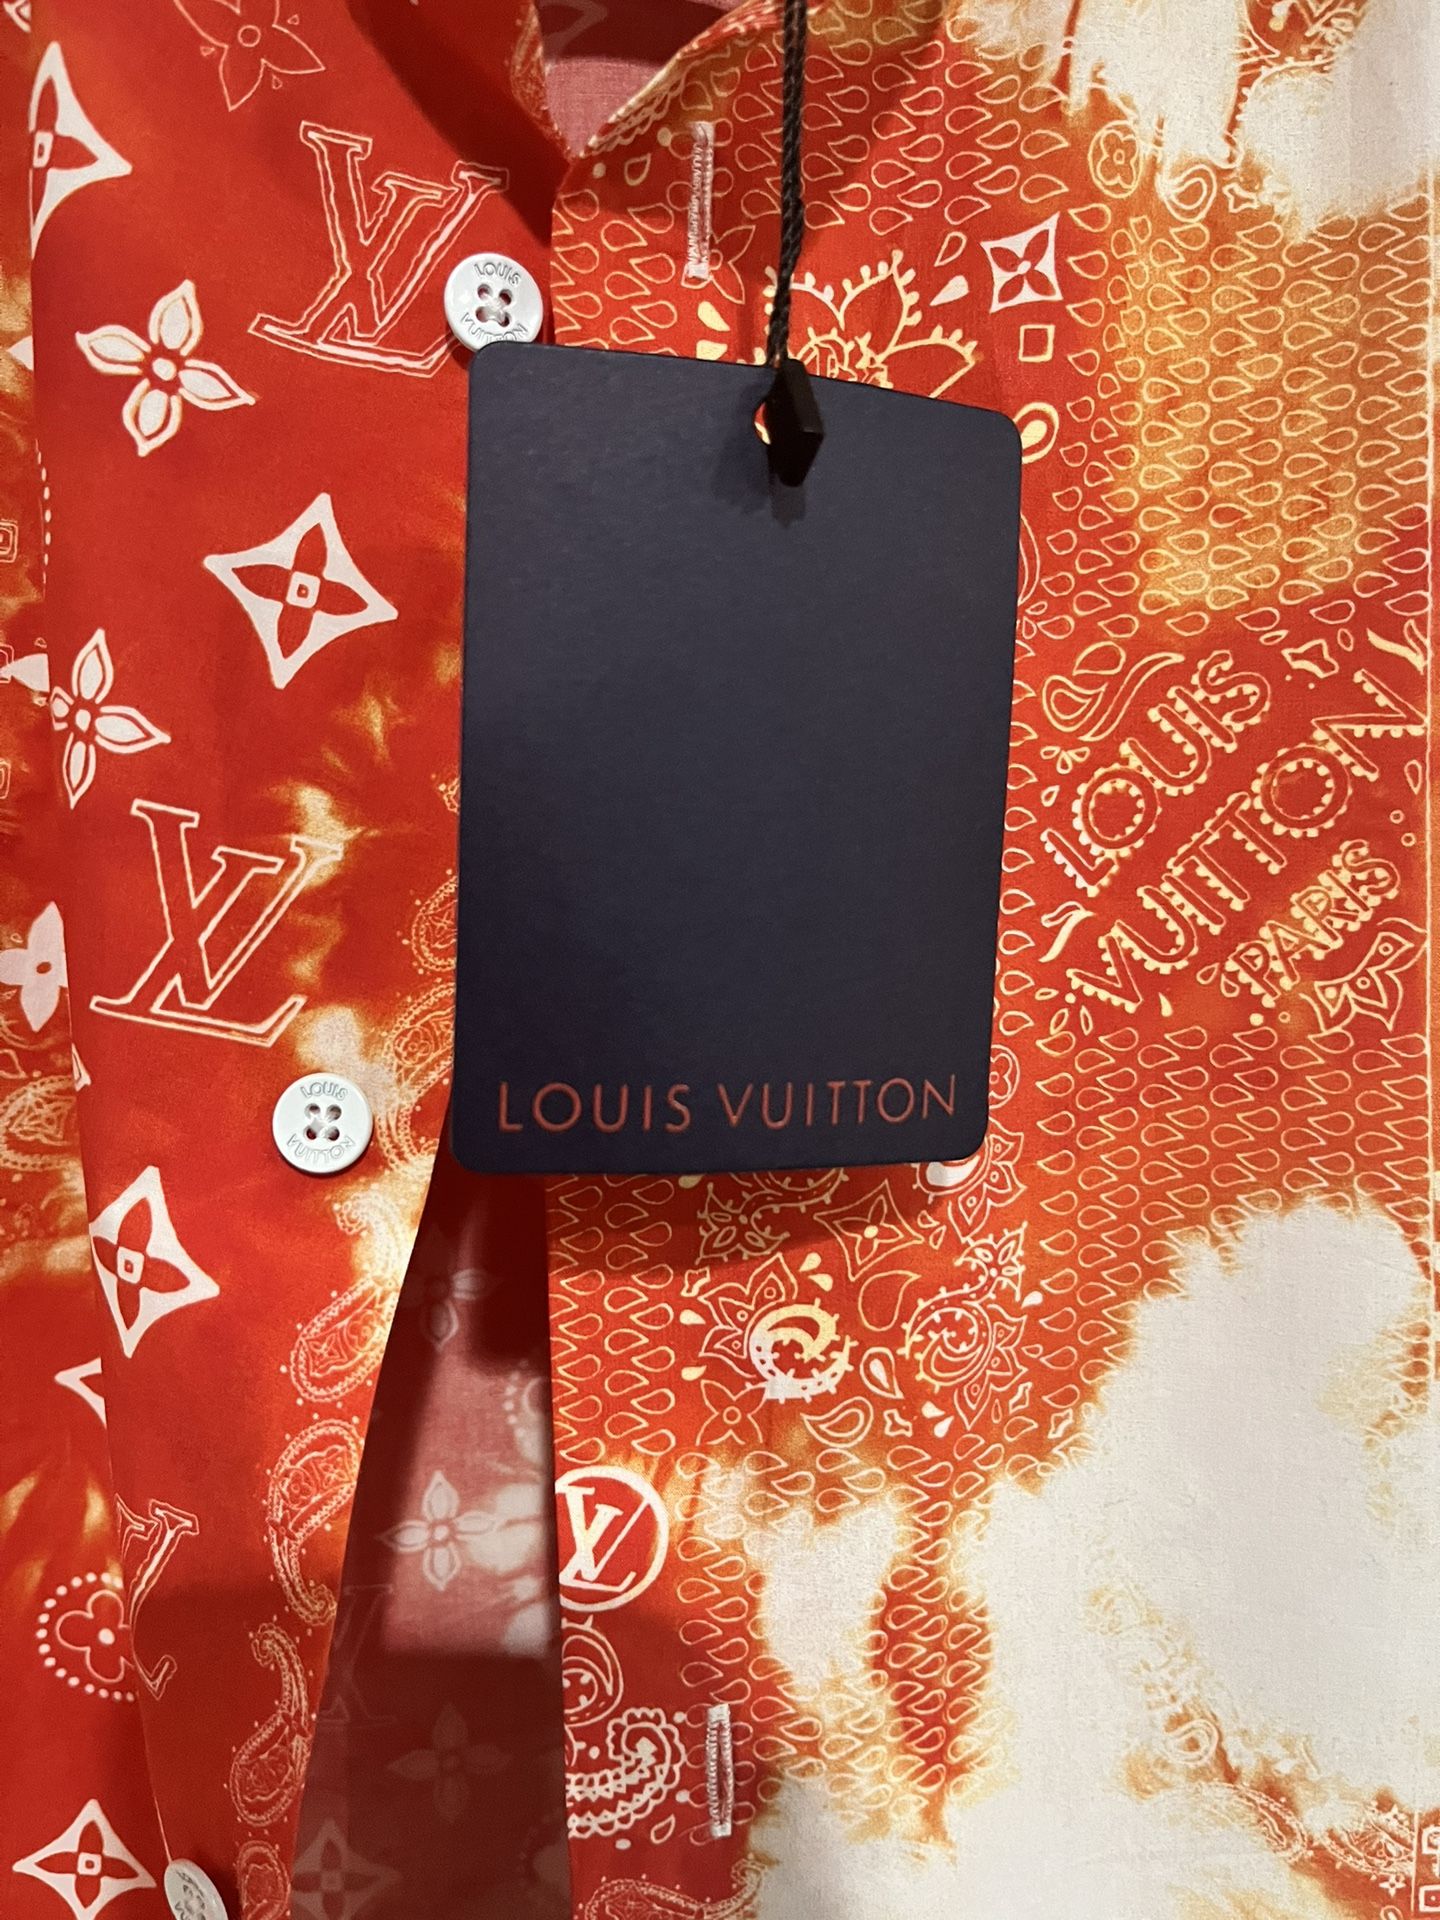 BRAND New Louis Vuitton Monogram Bandana Short-Sleeved Shirt (Size: Medium)  for Sale in Valley Stream, NY - OfferUp